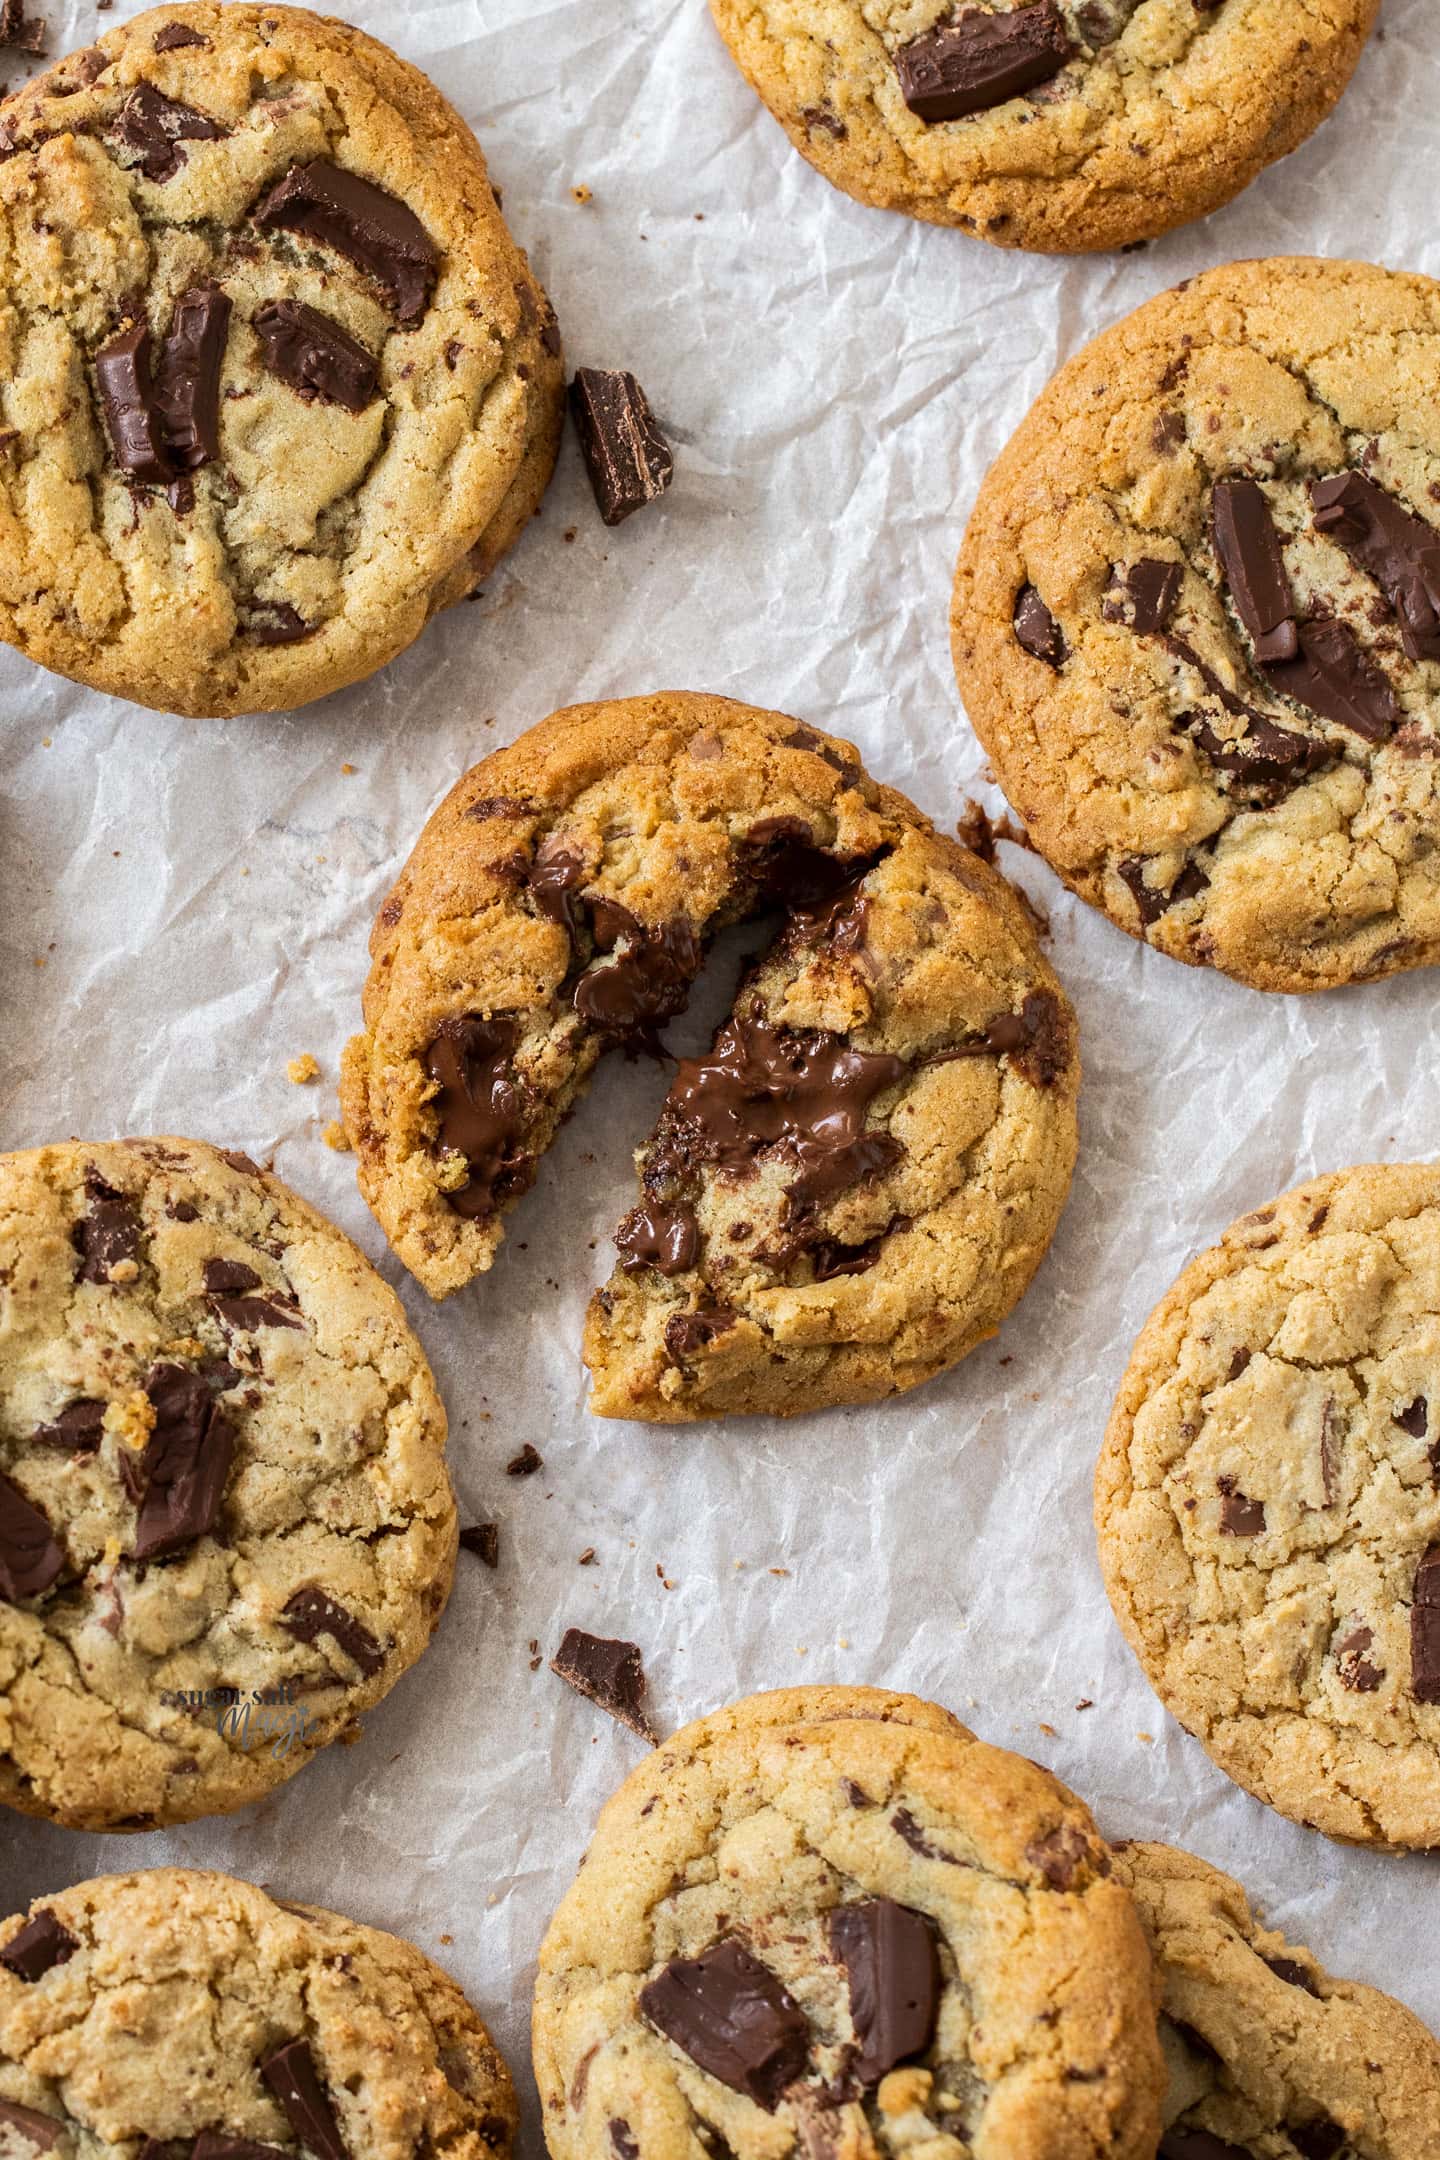 A gooey chocolate chunk cookie surrouned by more.